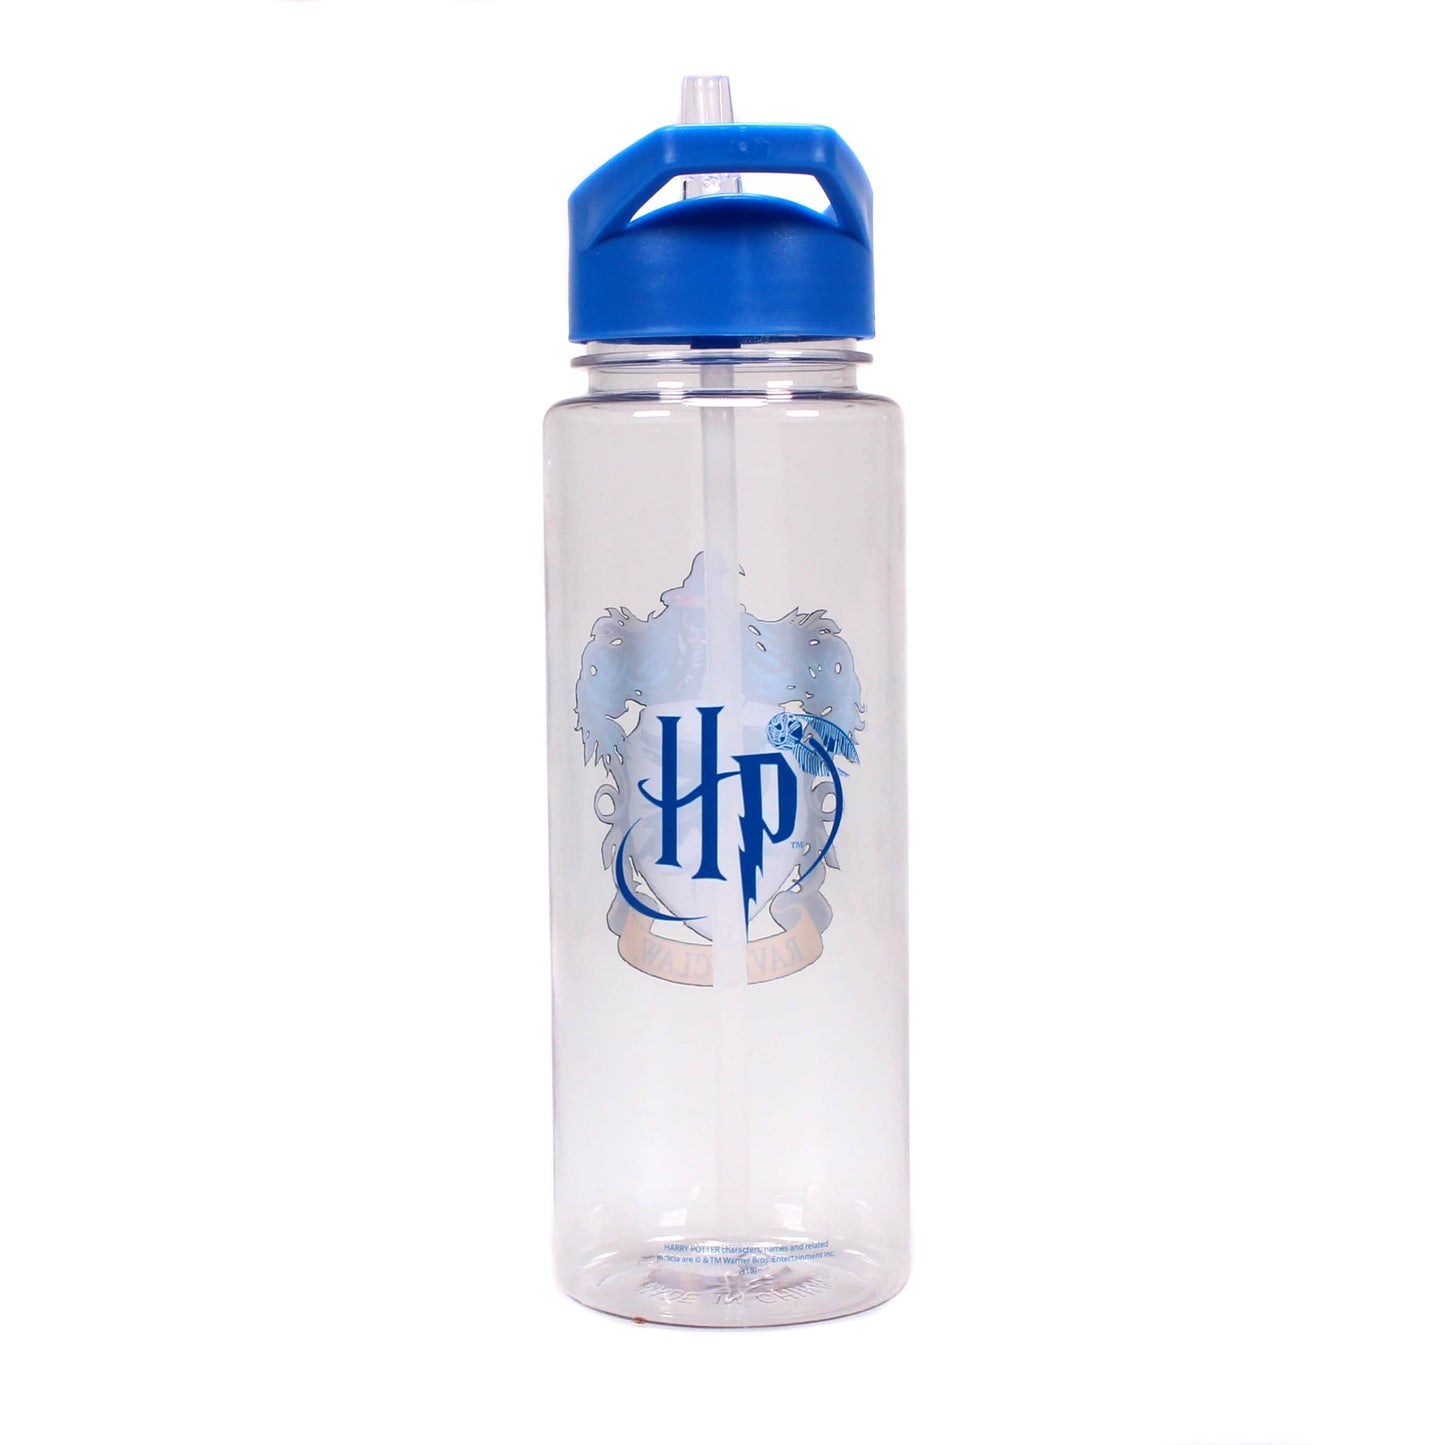 Harry Potter Water Bottle - Ravenclaw Crest Gifts